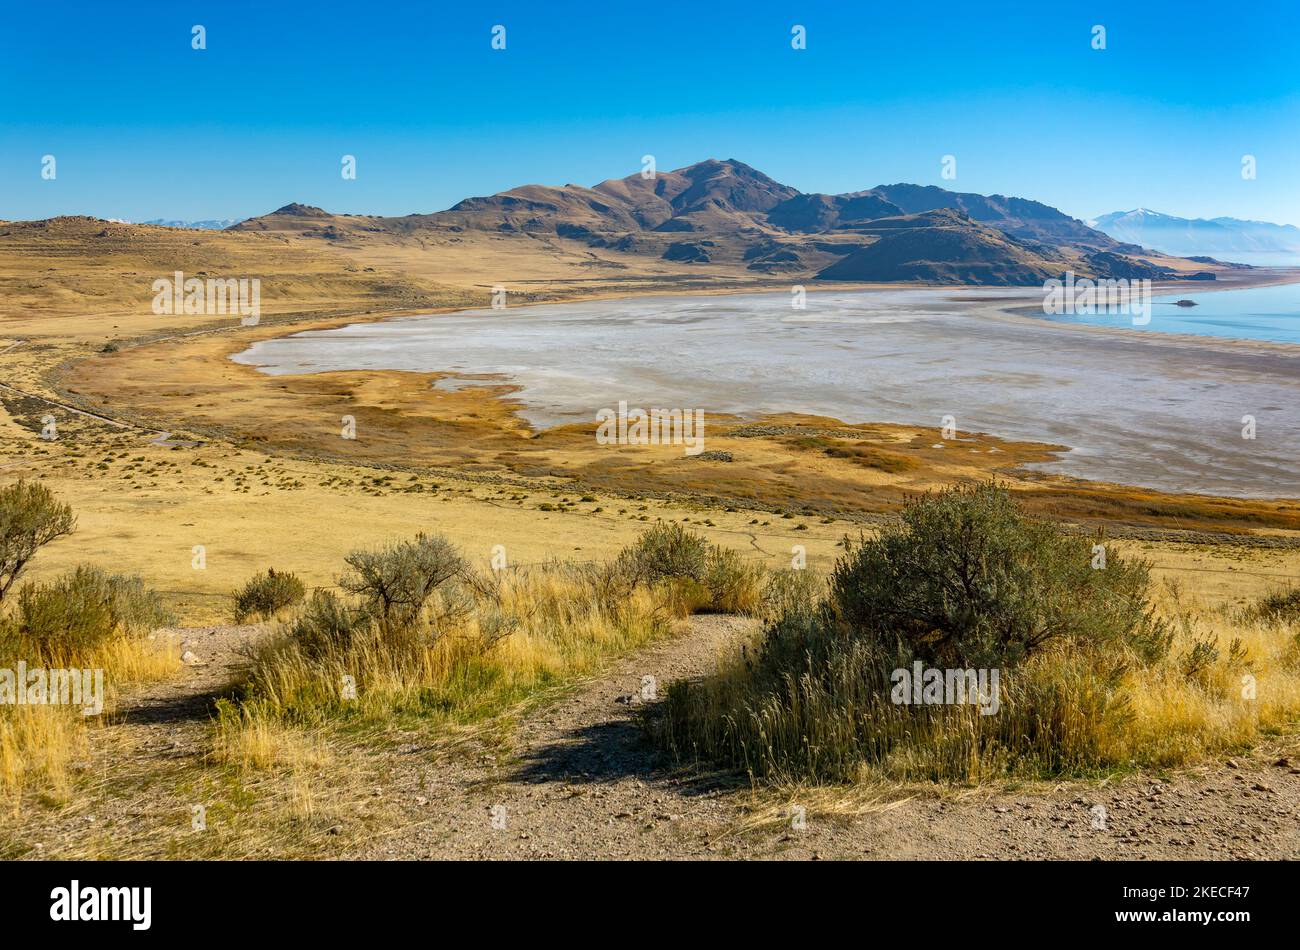 Landscape at the Great Salt Lake. Antelope Island, view from Buffalo Point into White Rock Bay. Stock Photo